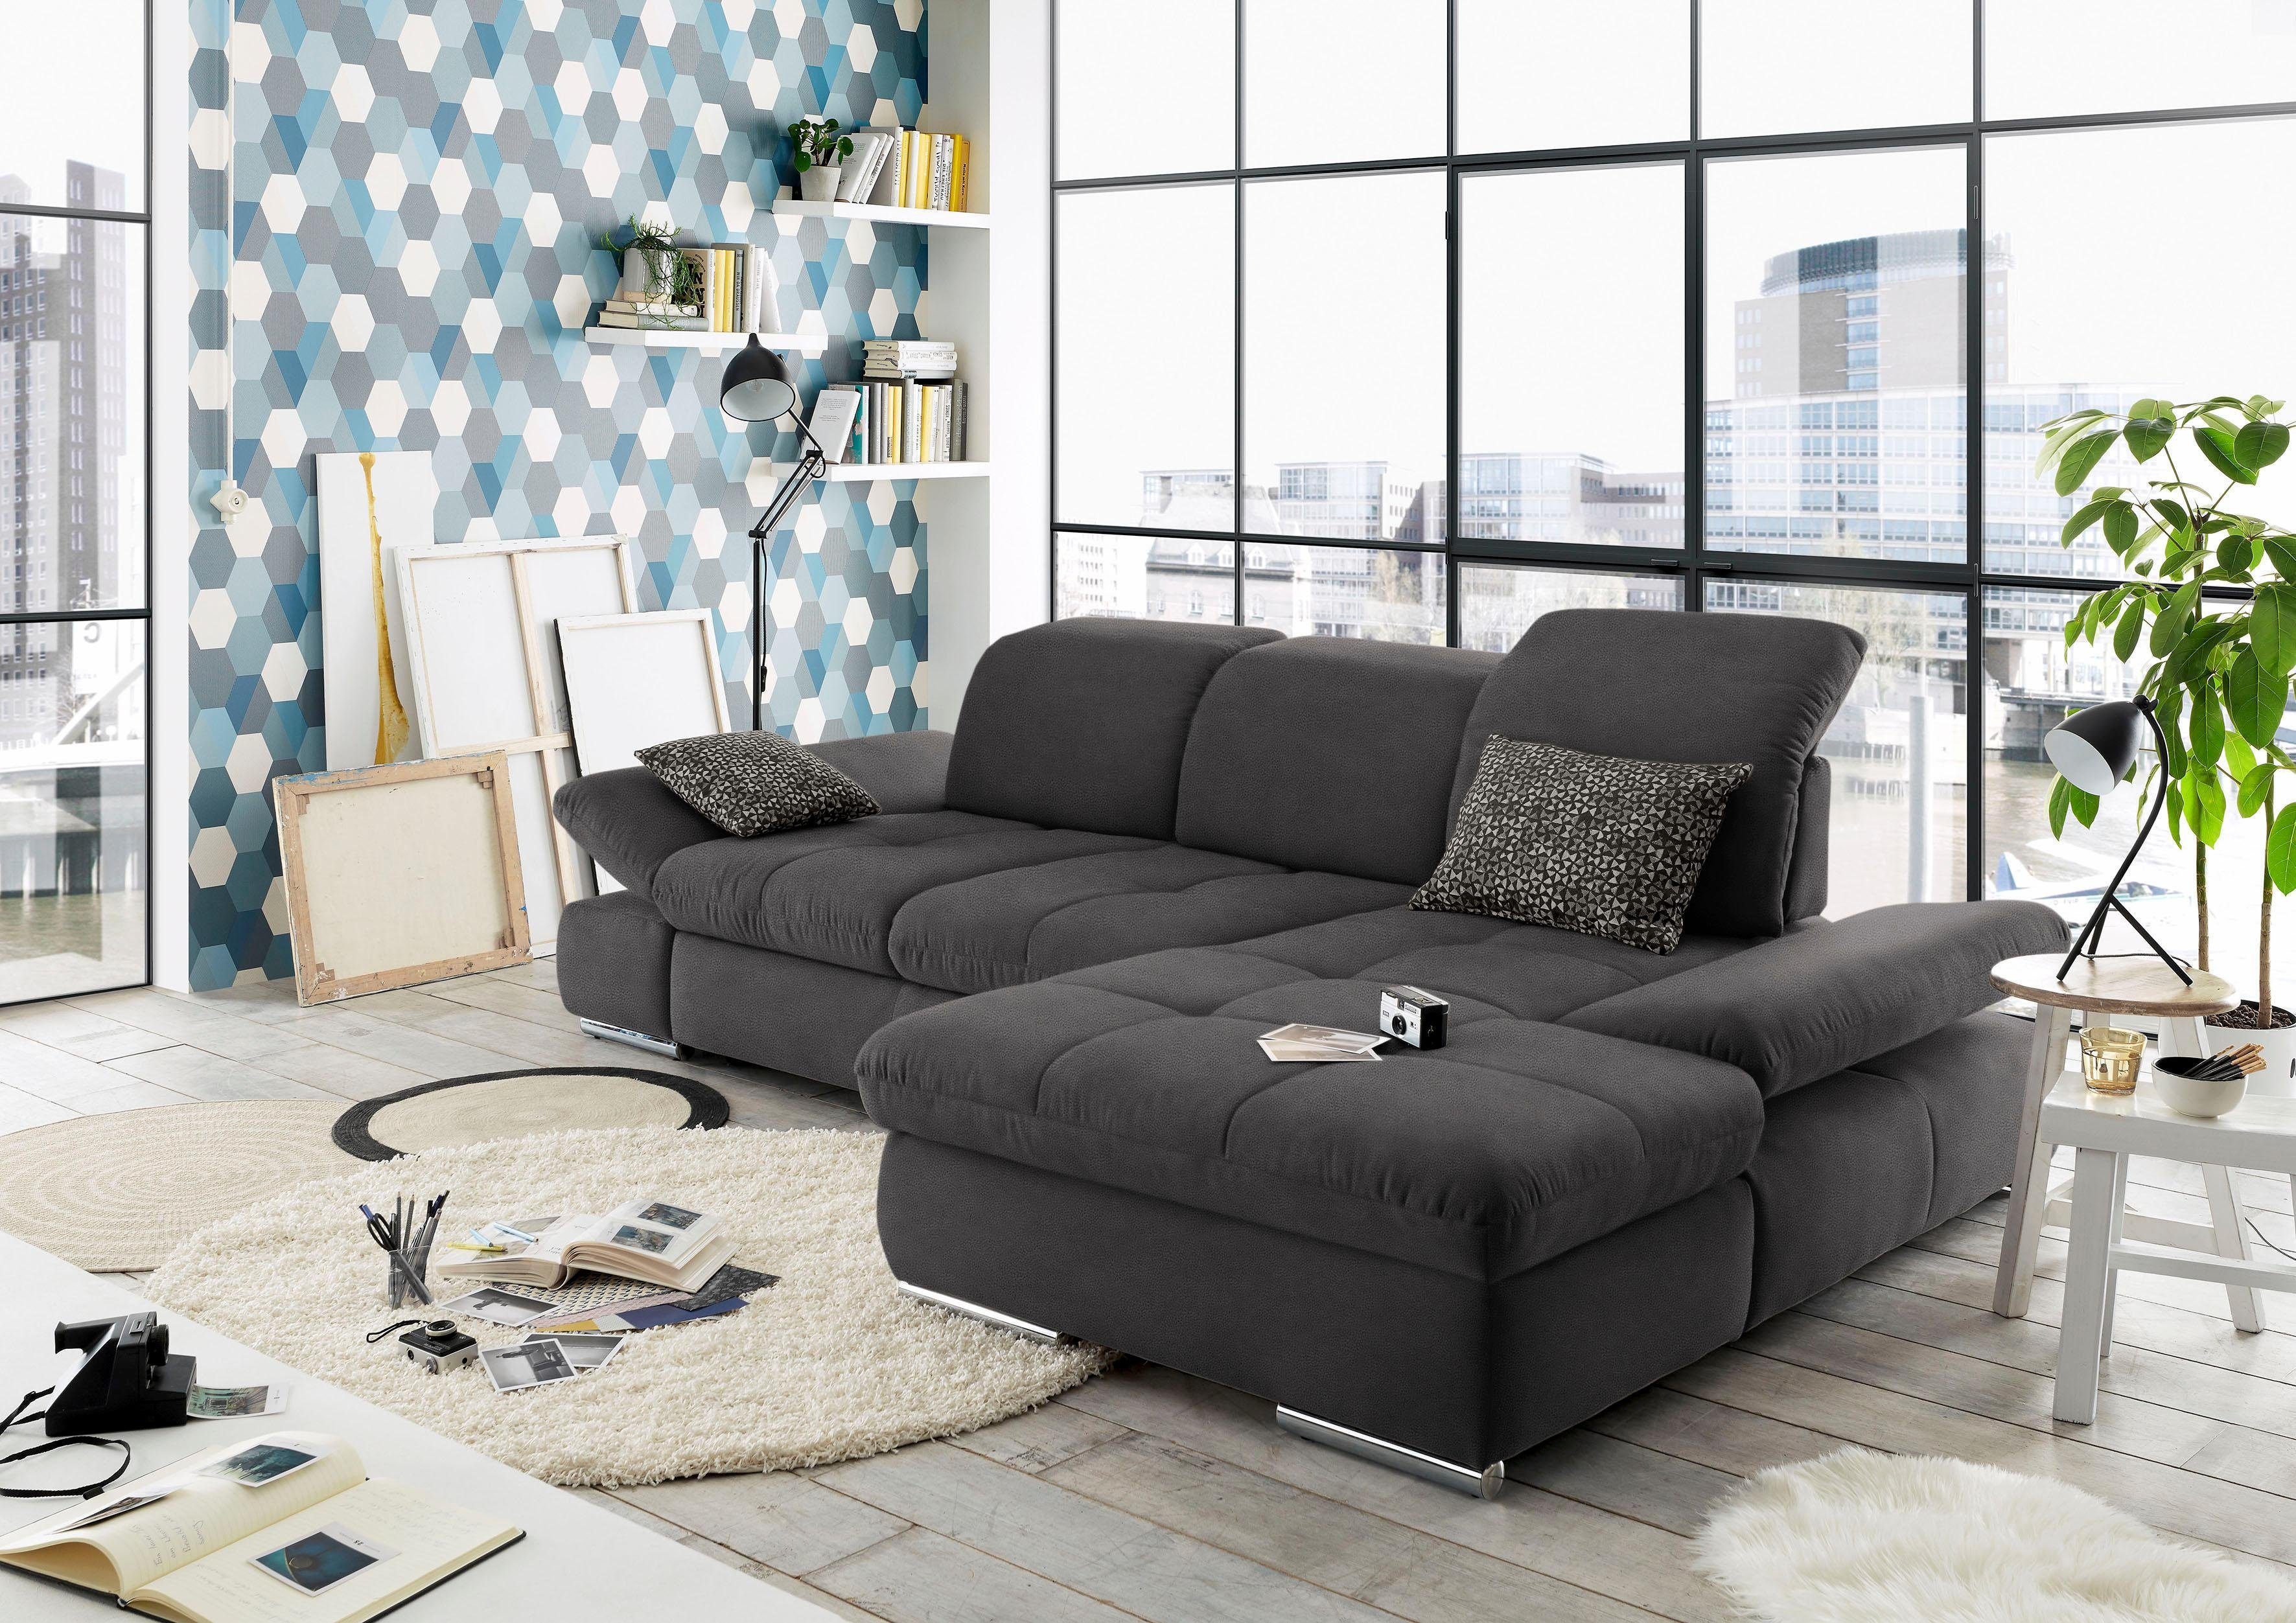 set one by Musterring Ecksofa SO 4100, Recamiere links oder rechts, wahlweise mit Bettfunktion